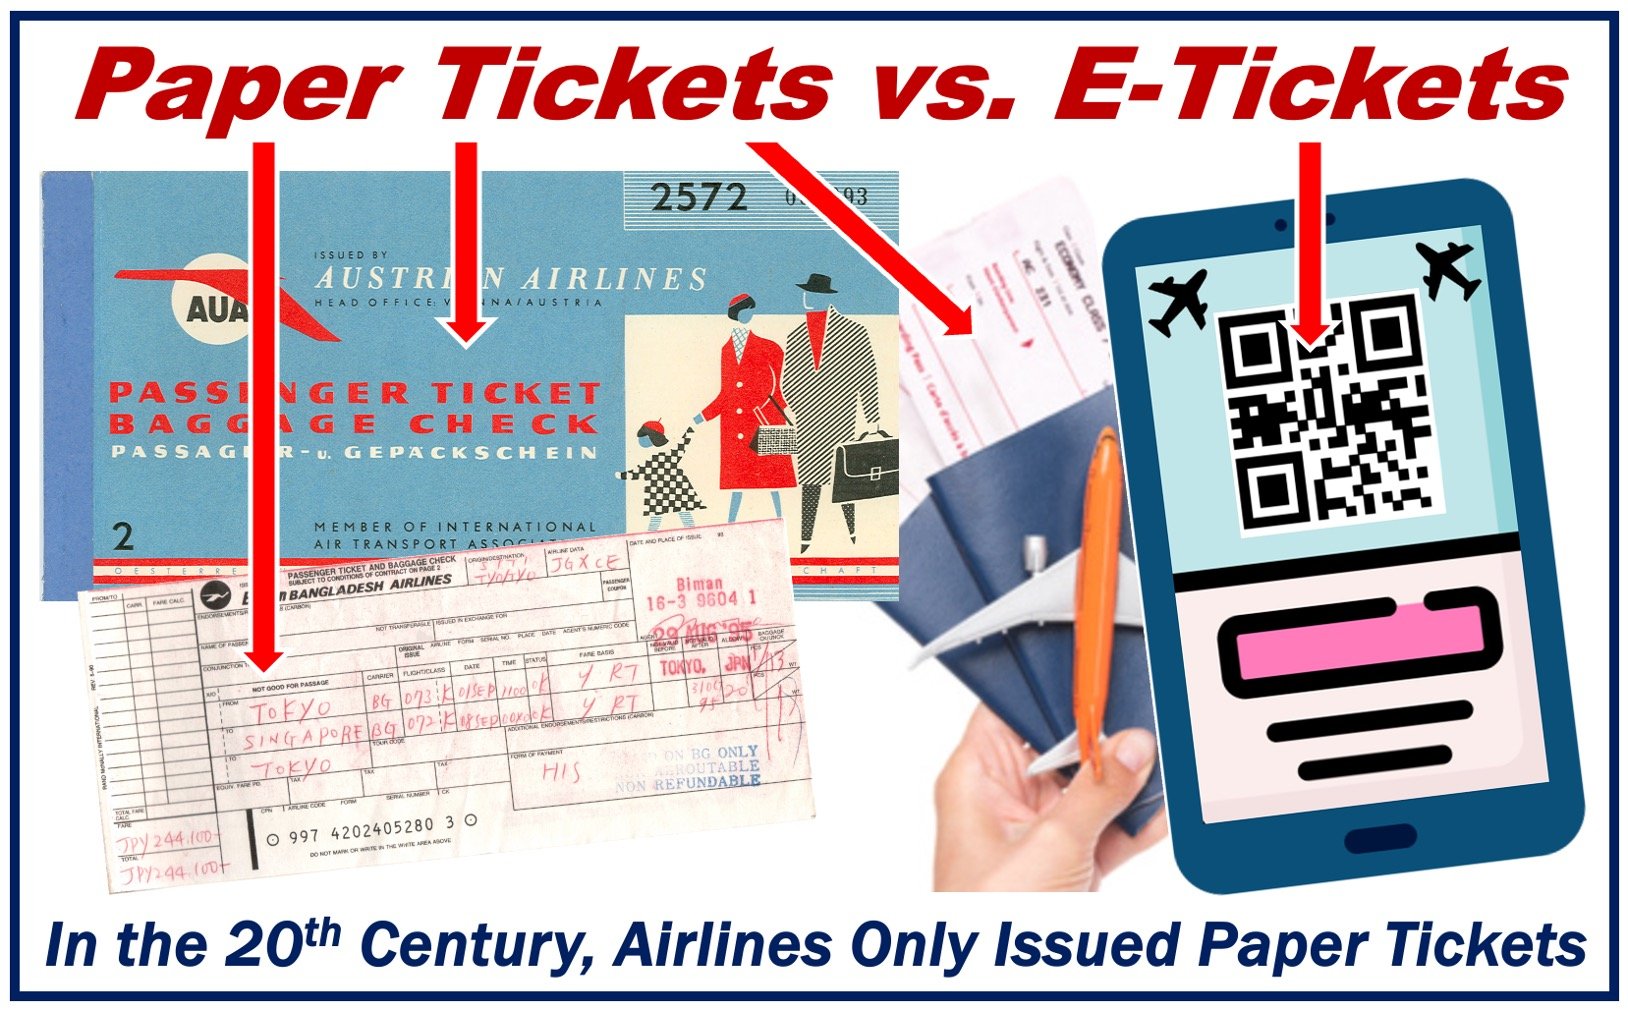 3 Airline paper tickets and one airline e-ticket